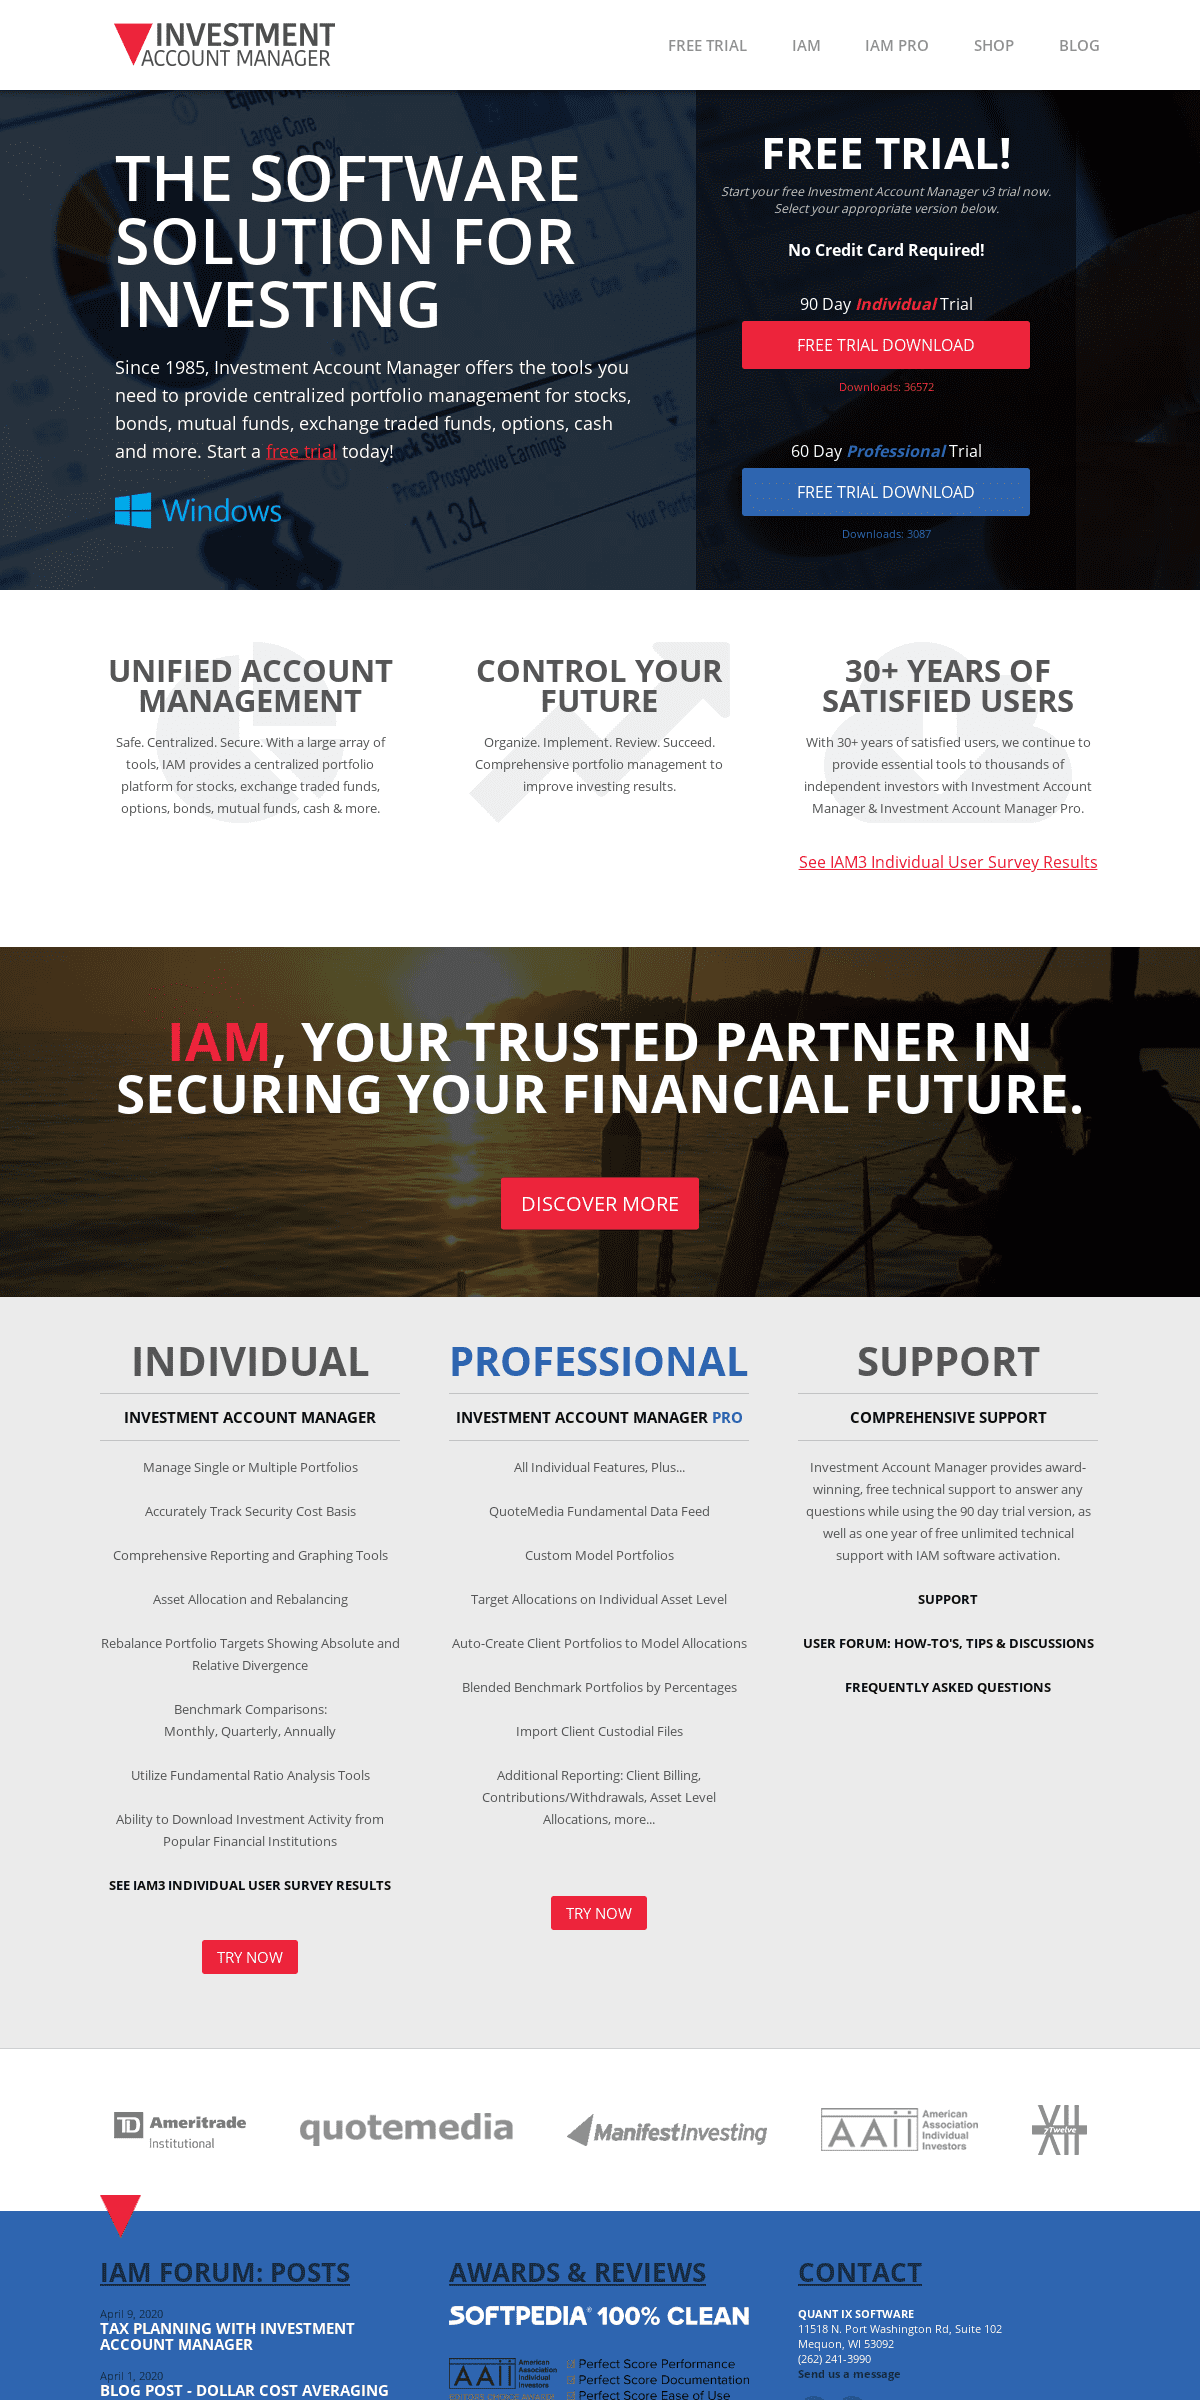 A complete backup of investmentaccountmanager.com